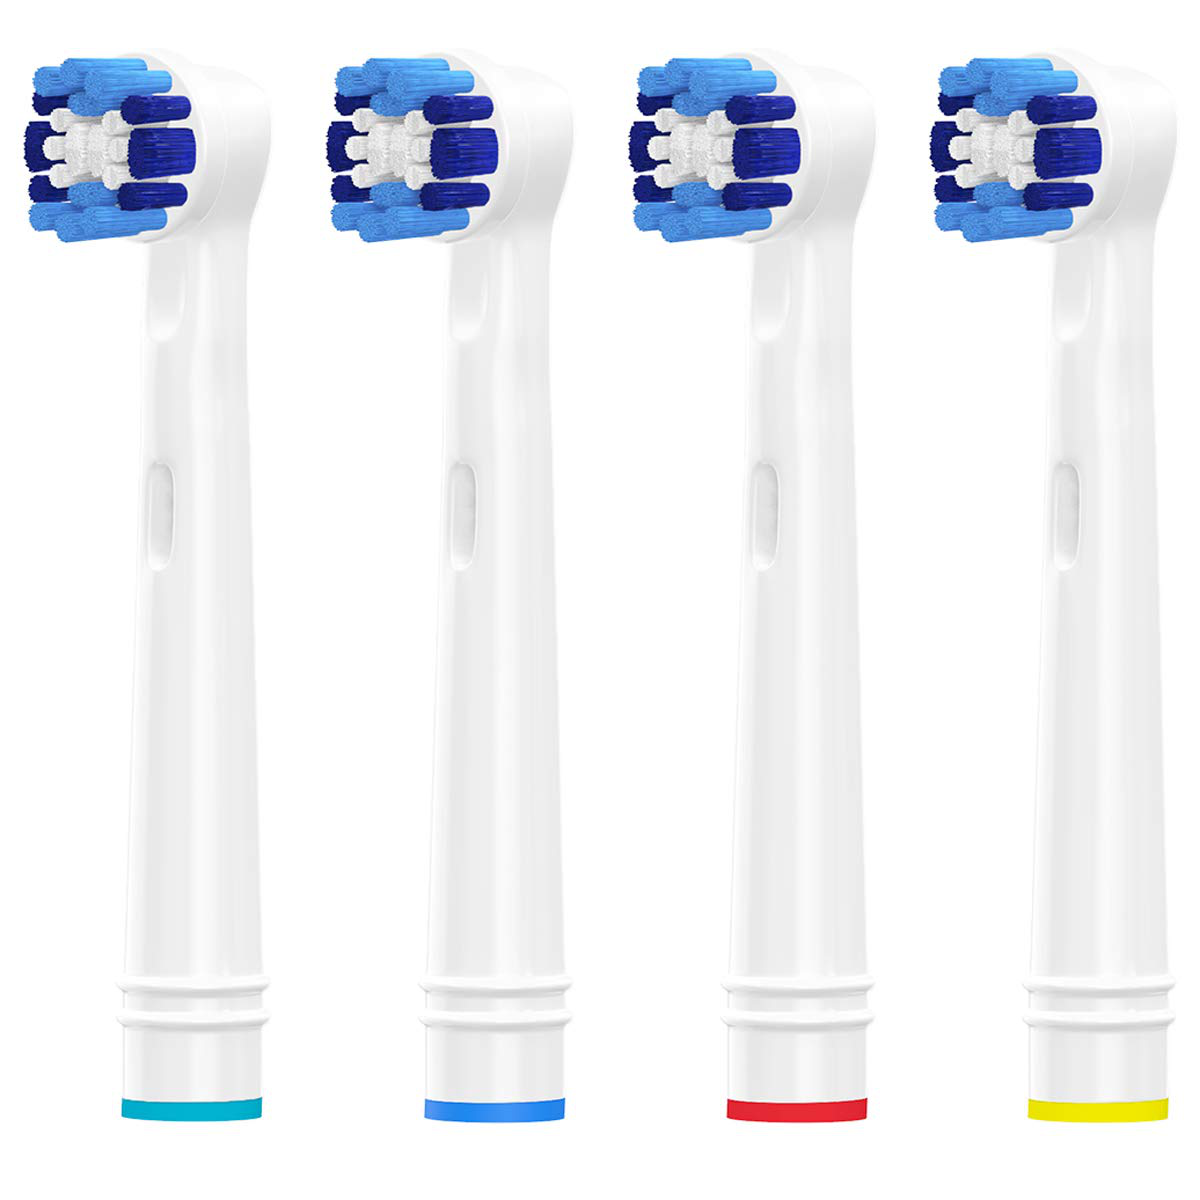 VINFANY 4PCS Replacement Brush Heads for Oral B, Refills Toothbrush Heads for Oral-B Electric Toothbrush, Polishes to Remove Stains for Whiter Teeth